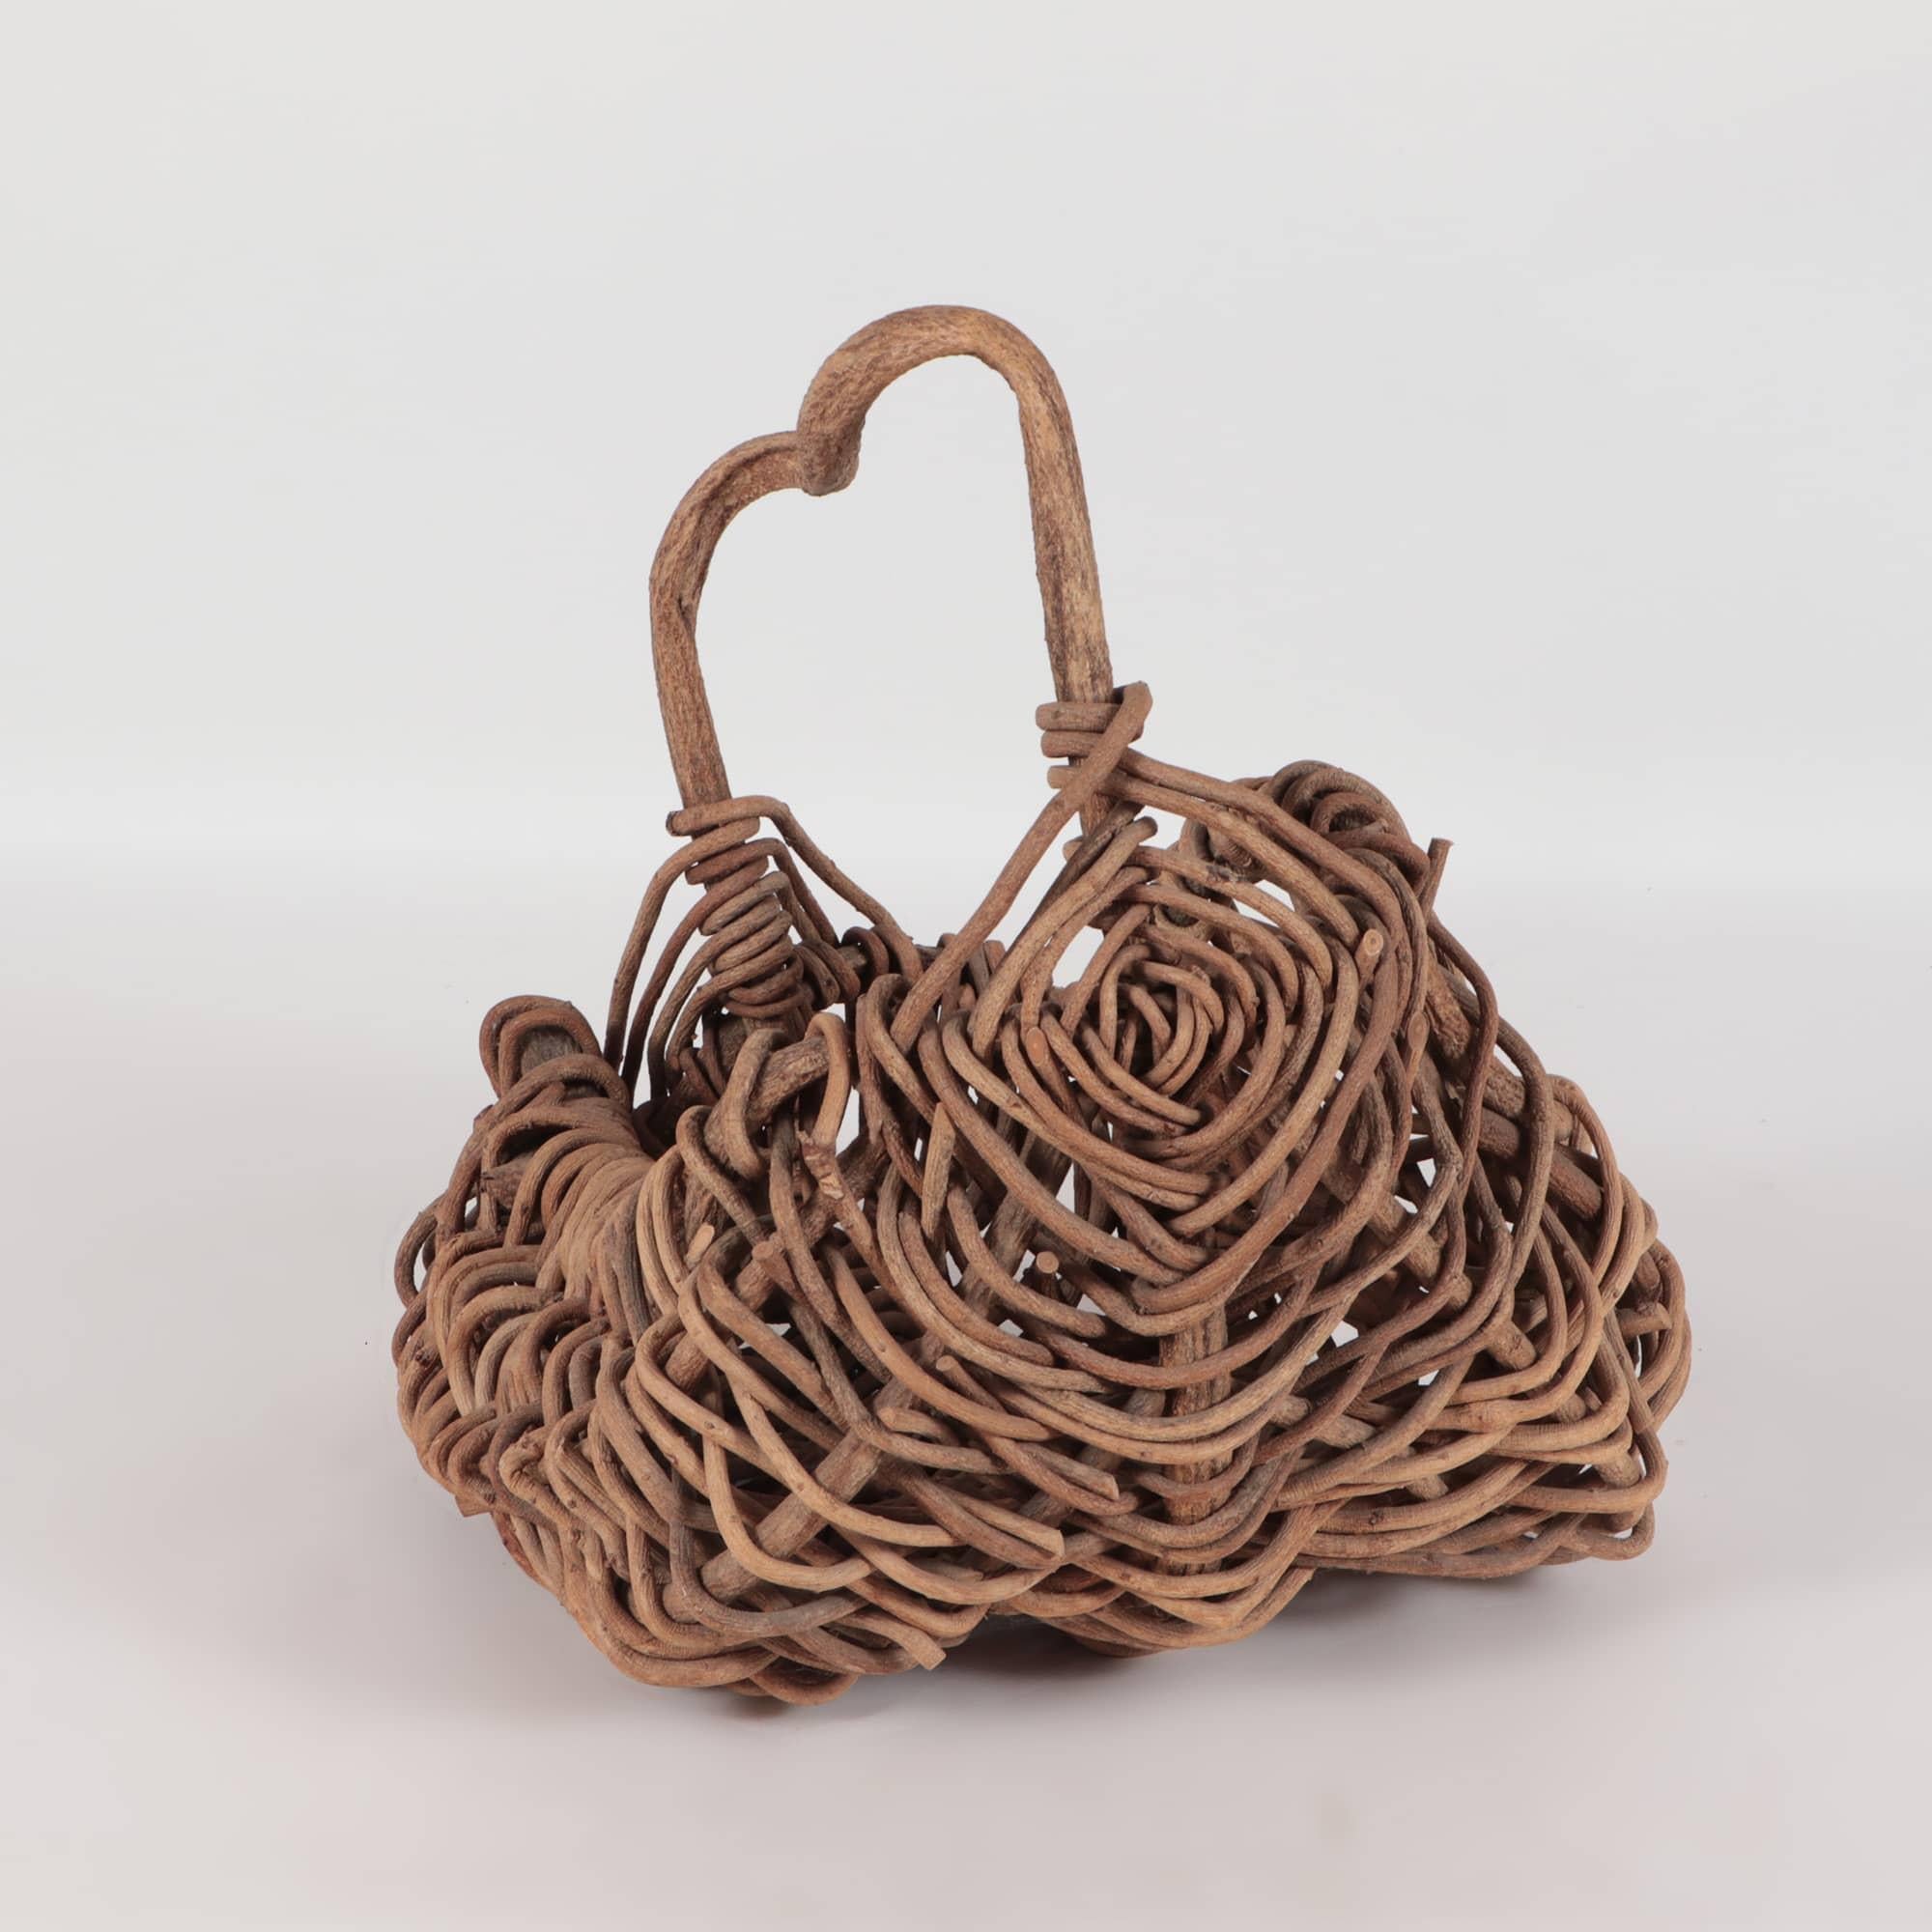 A large and beautifully executed 19th century vintage folk art tree twig branch basket sculpture.